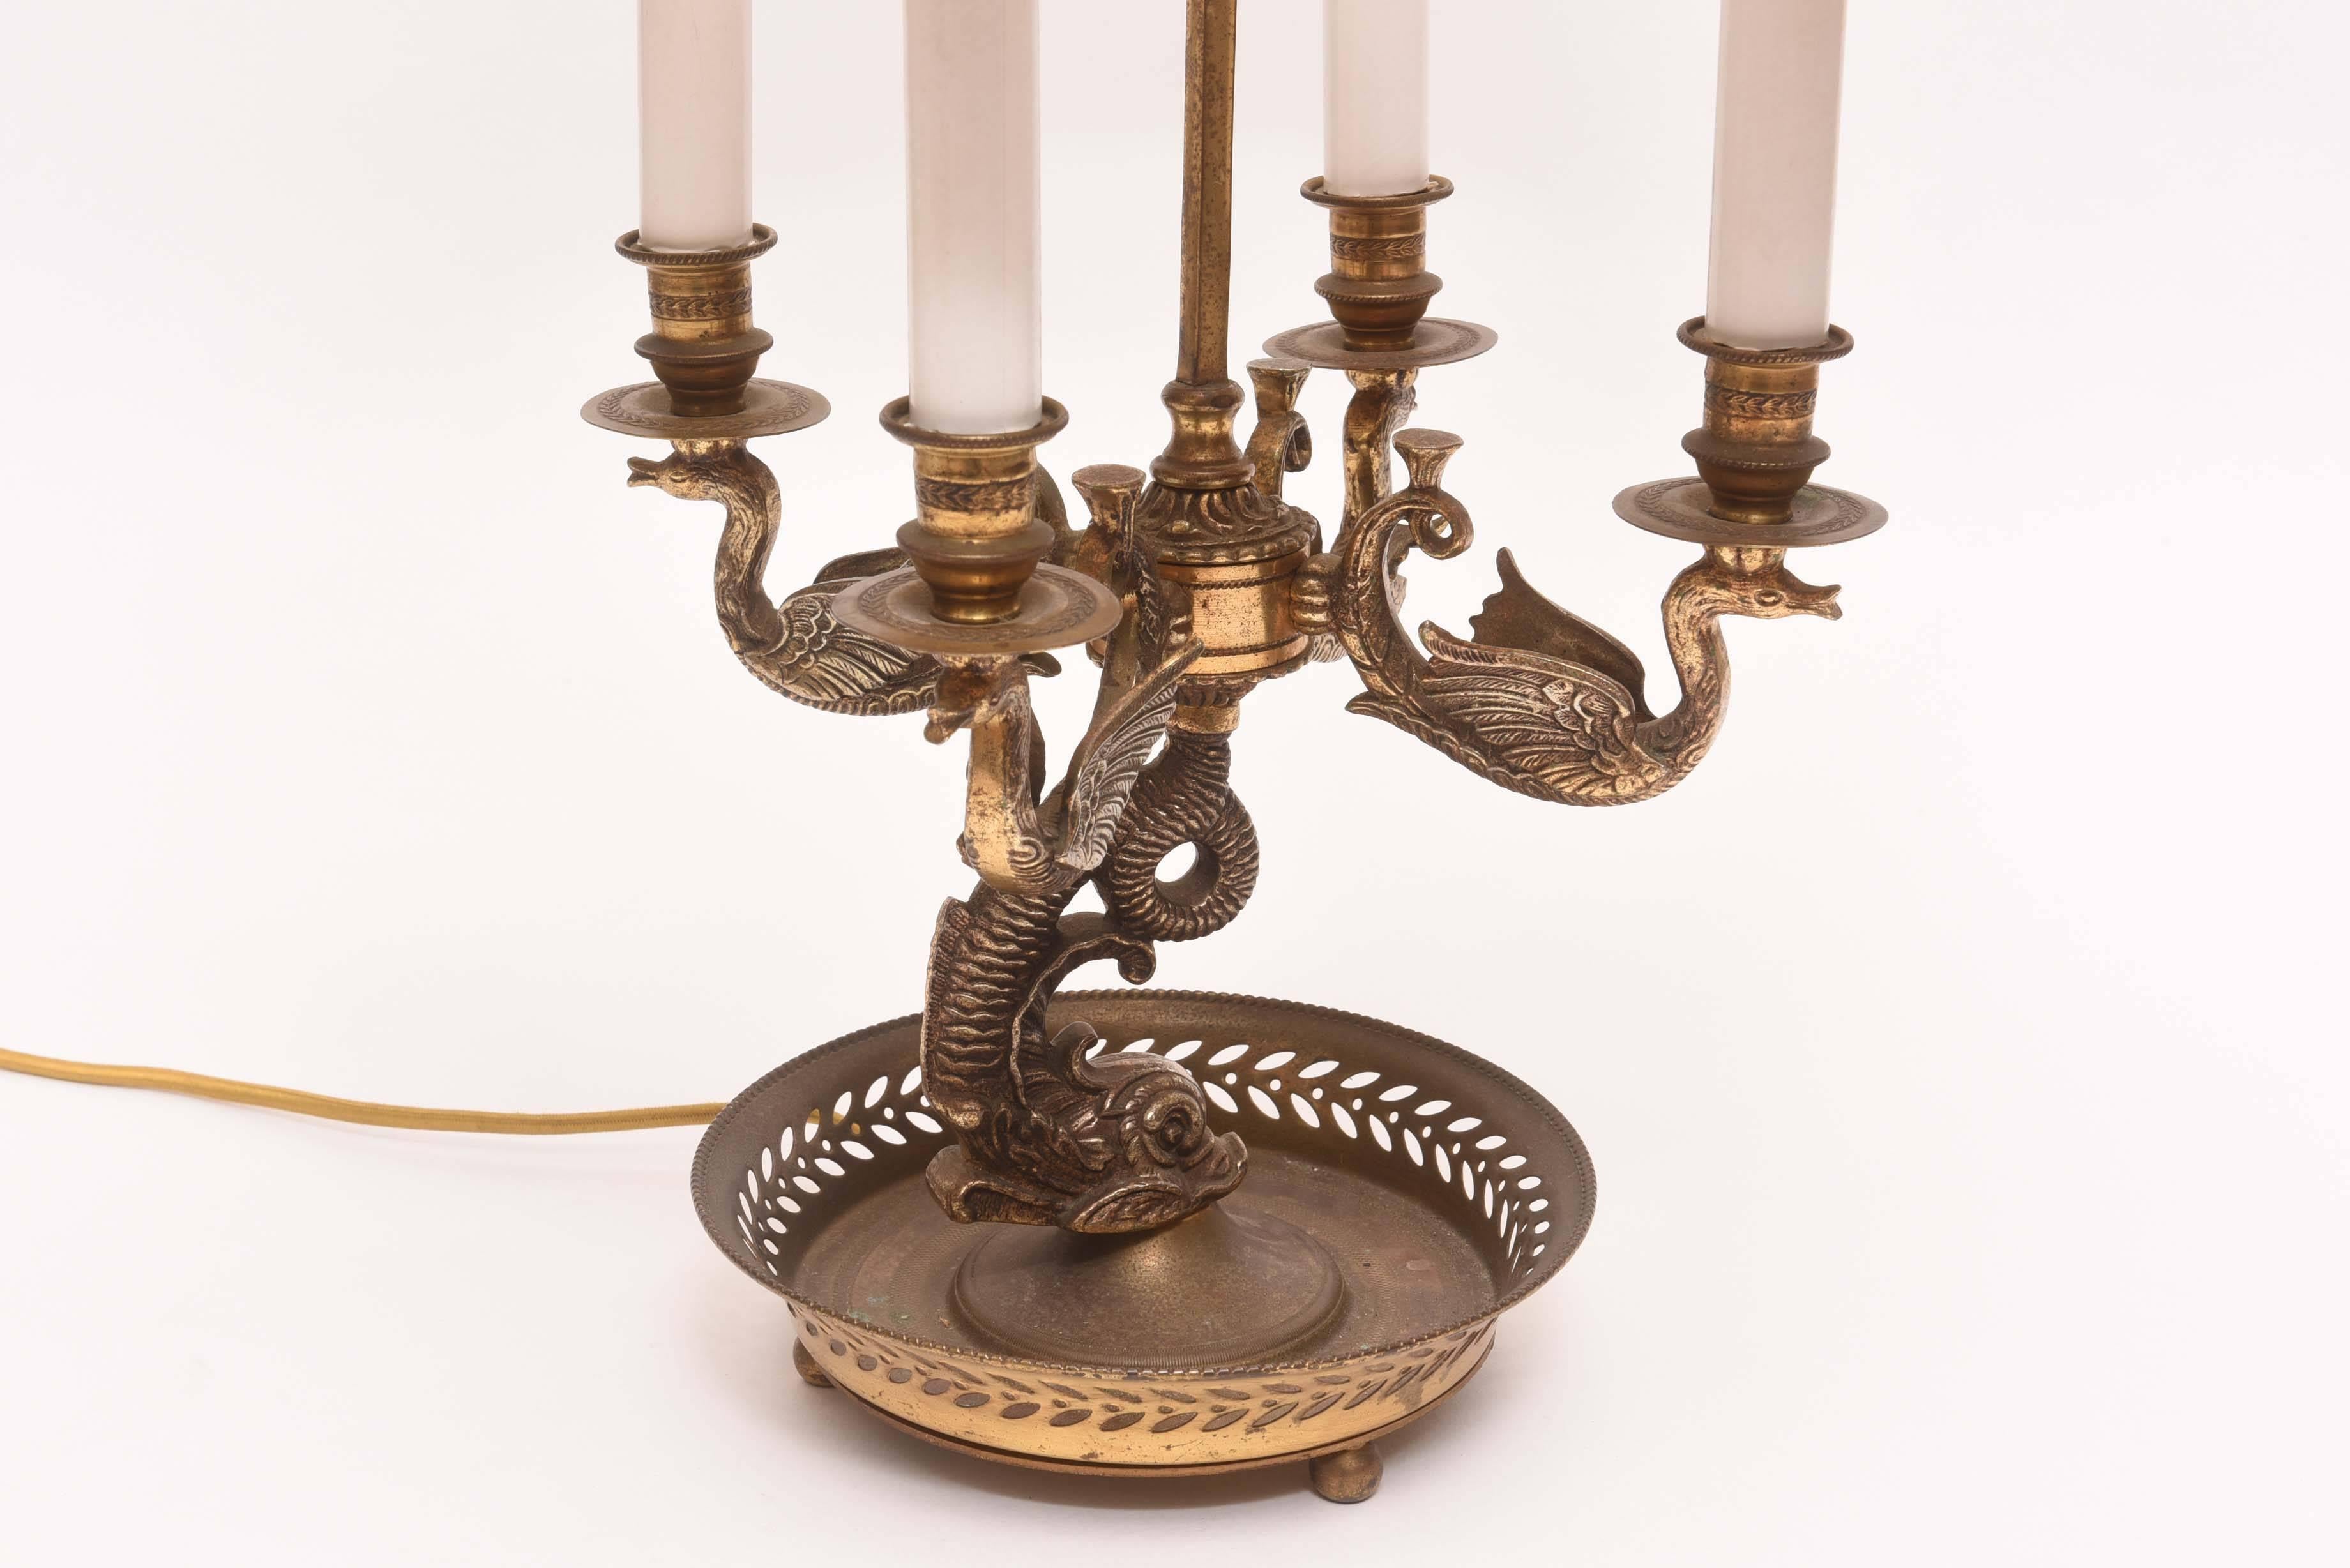 Large and regal pair of late 19th century Bouillotte lamps with dolphin base and swan arms. Finished at top with beautiful bronze dolphin finial. Original dark hunter green shades with gold design.